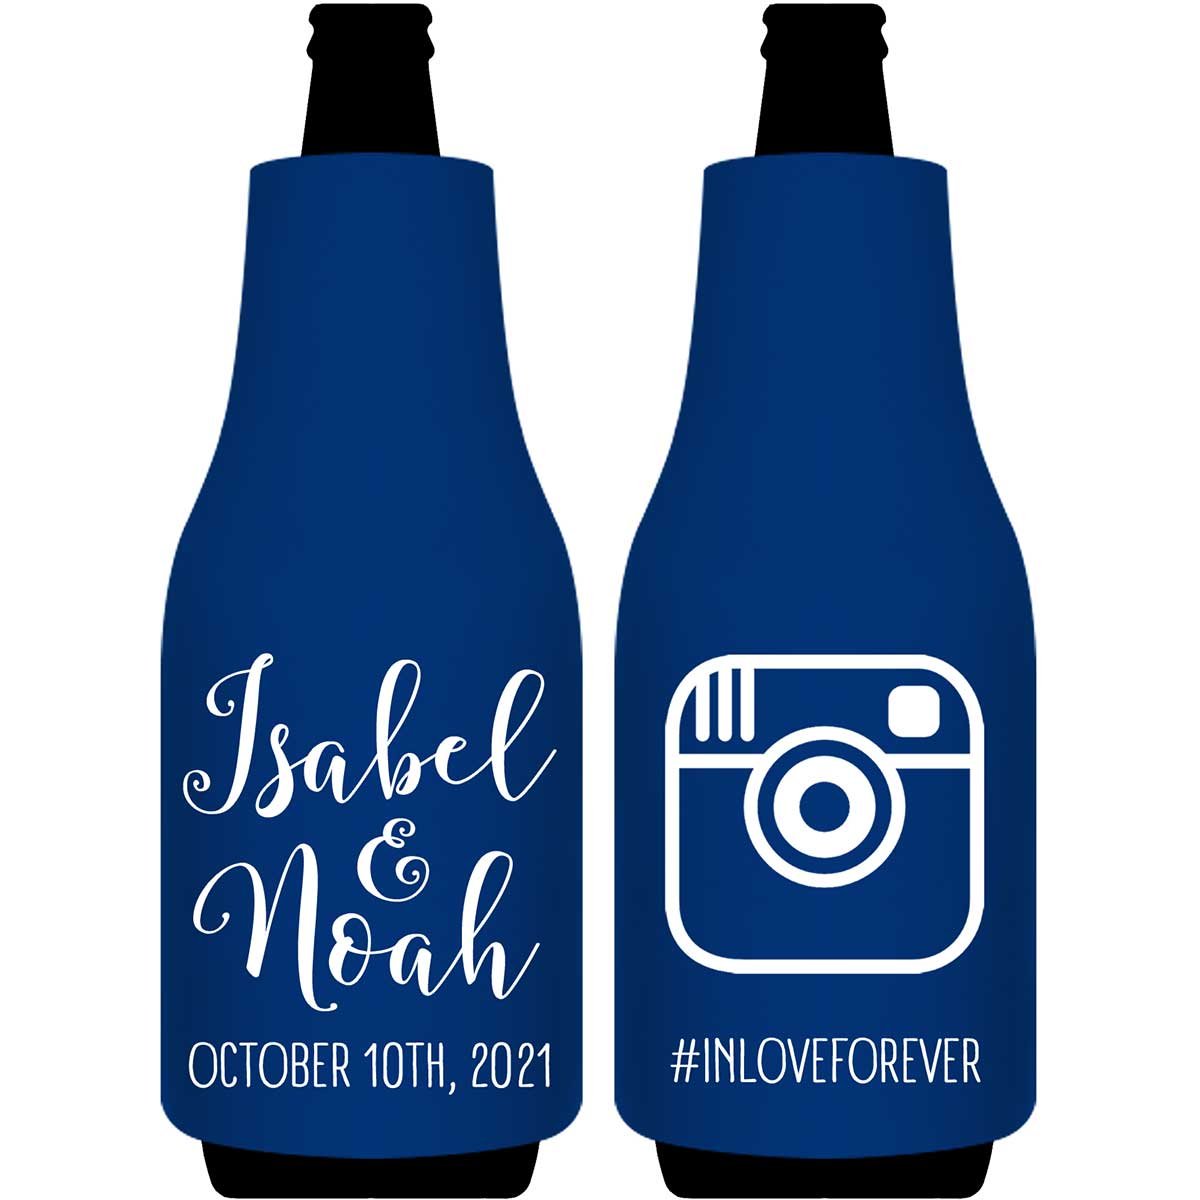 Instagram Hashtag 1A Foldable Bottle Sleeve Koozies Wedding Gifts for Guests